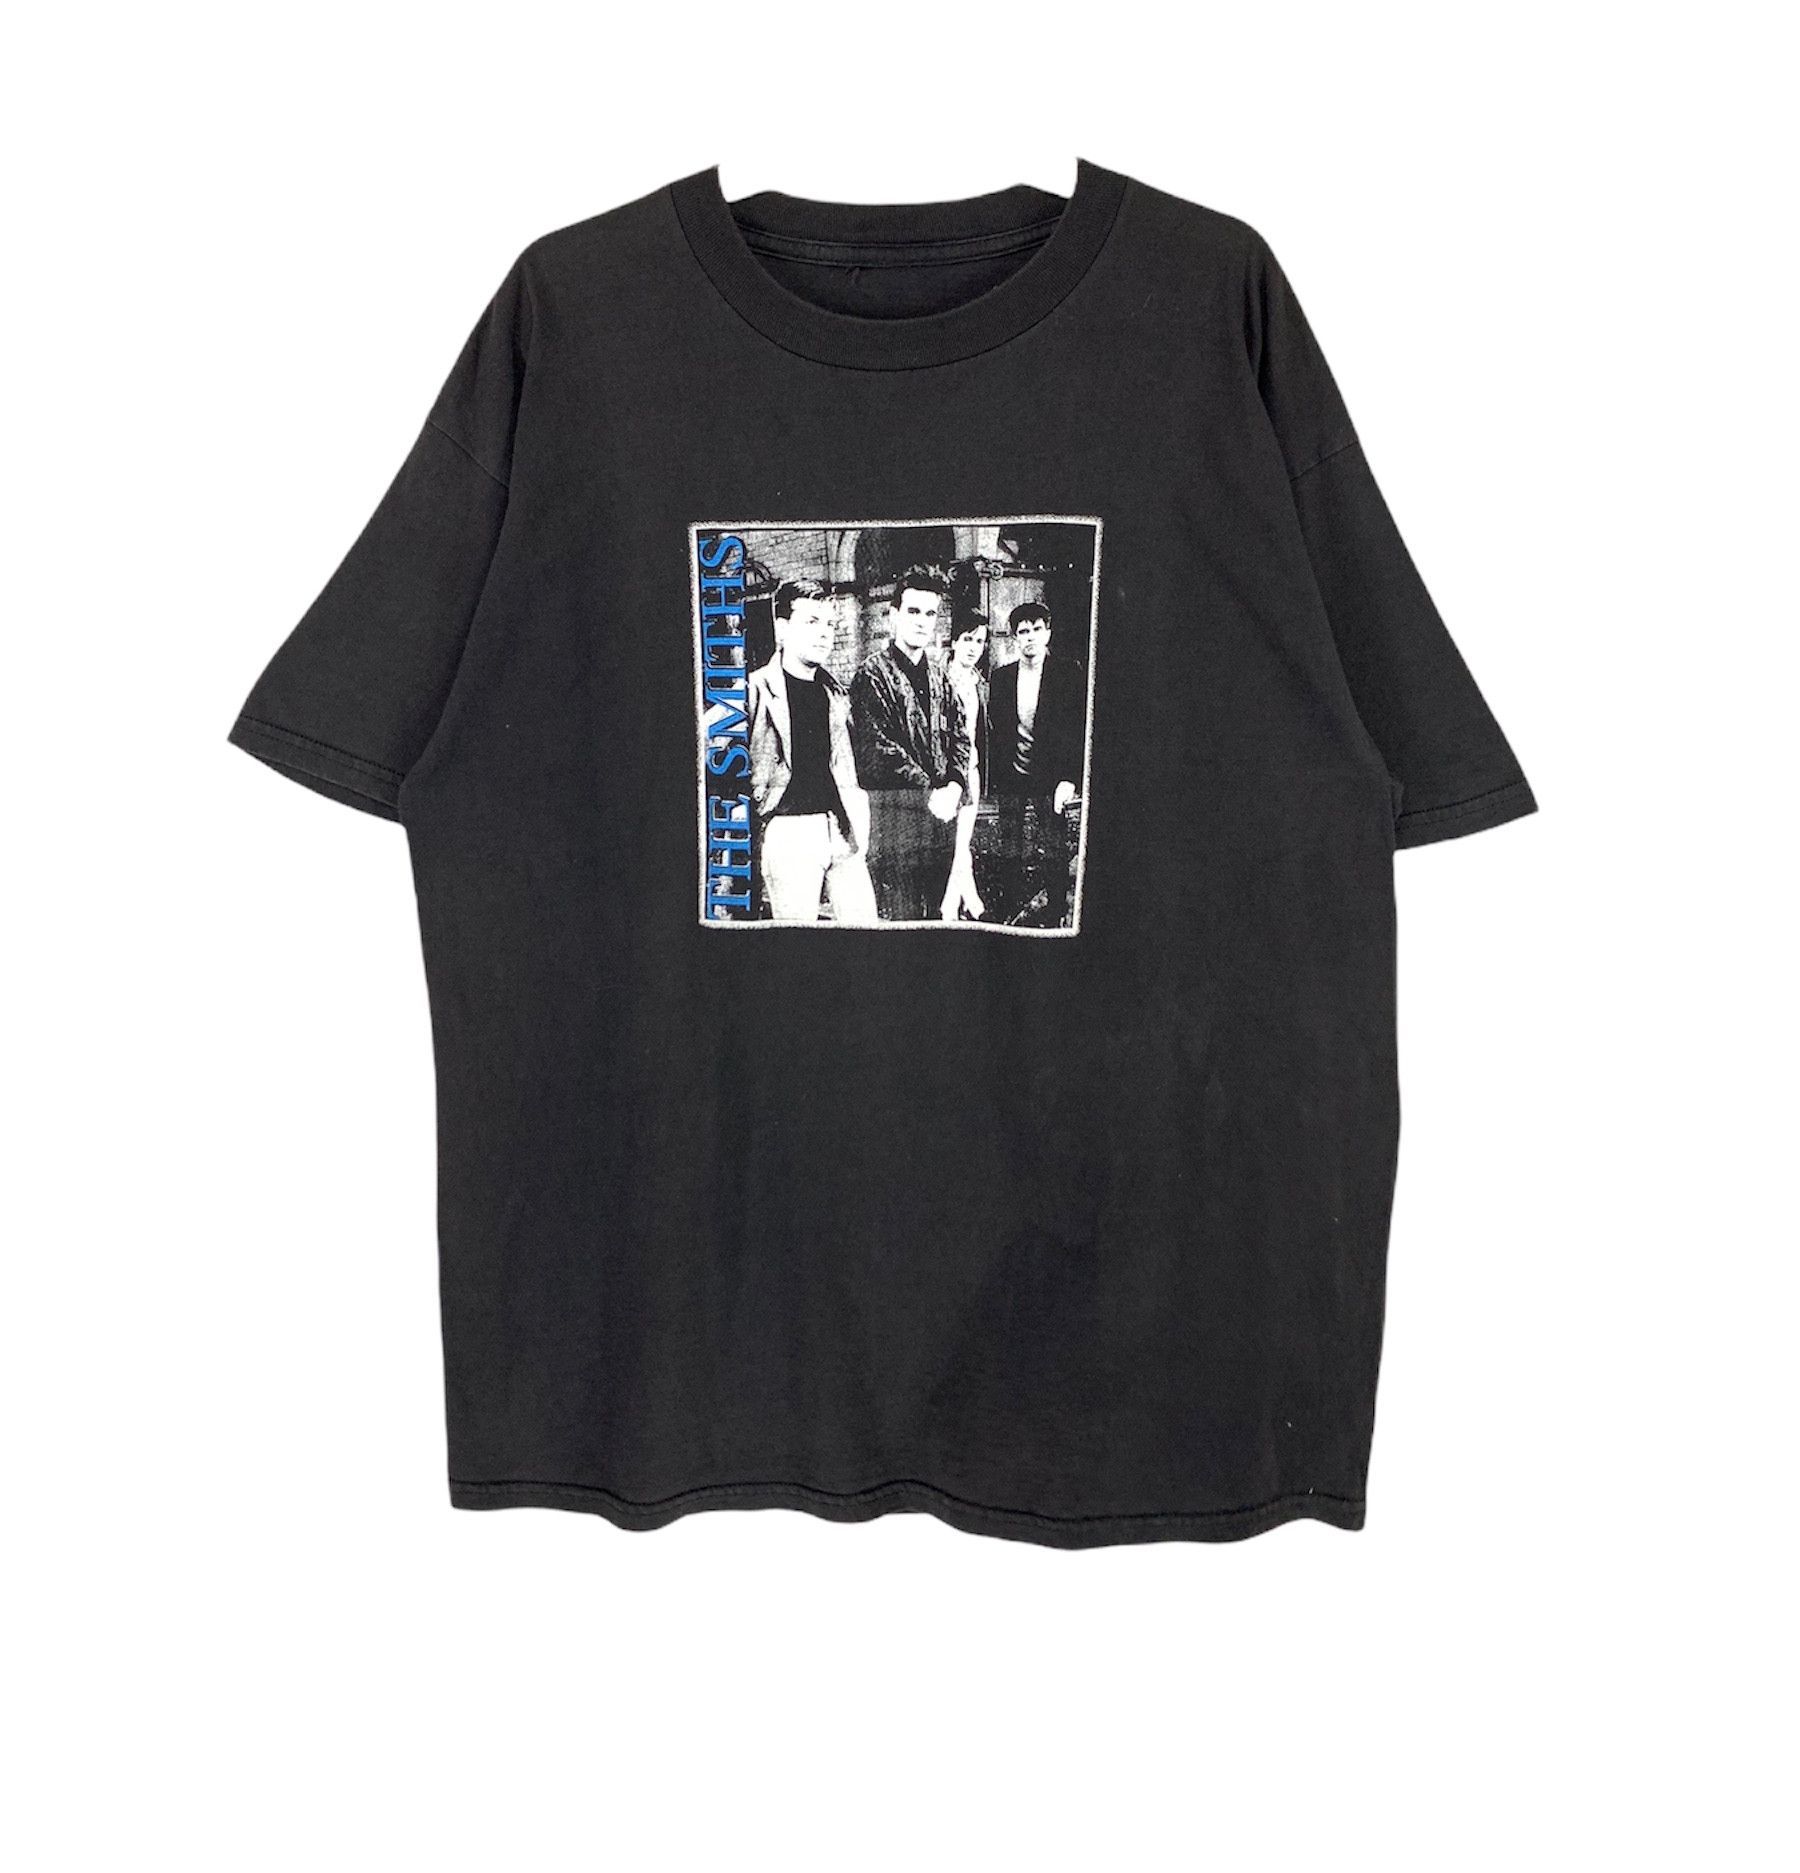 Vintage The smith line up english indie post punk morrissey vtg tee ...